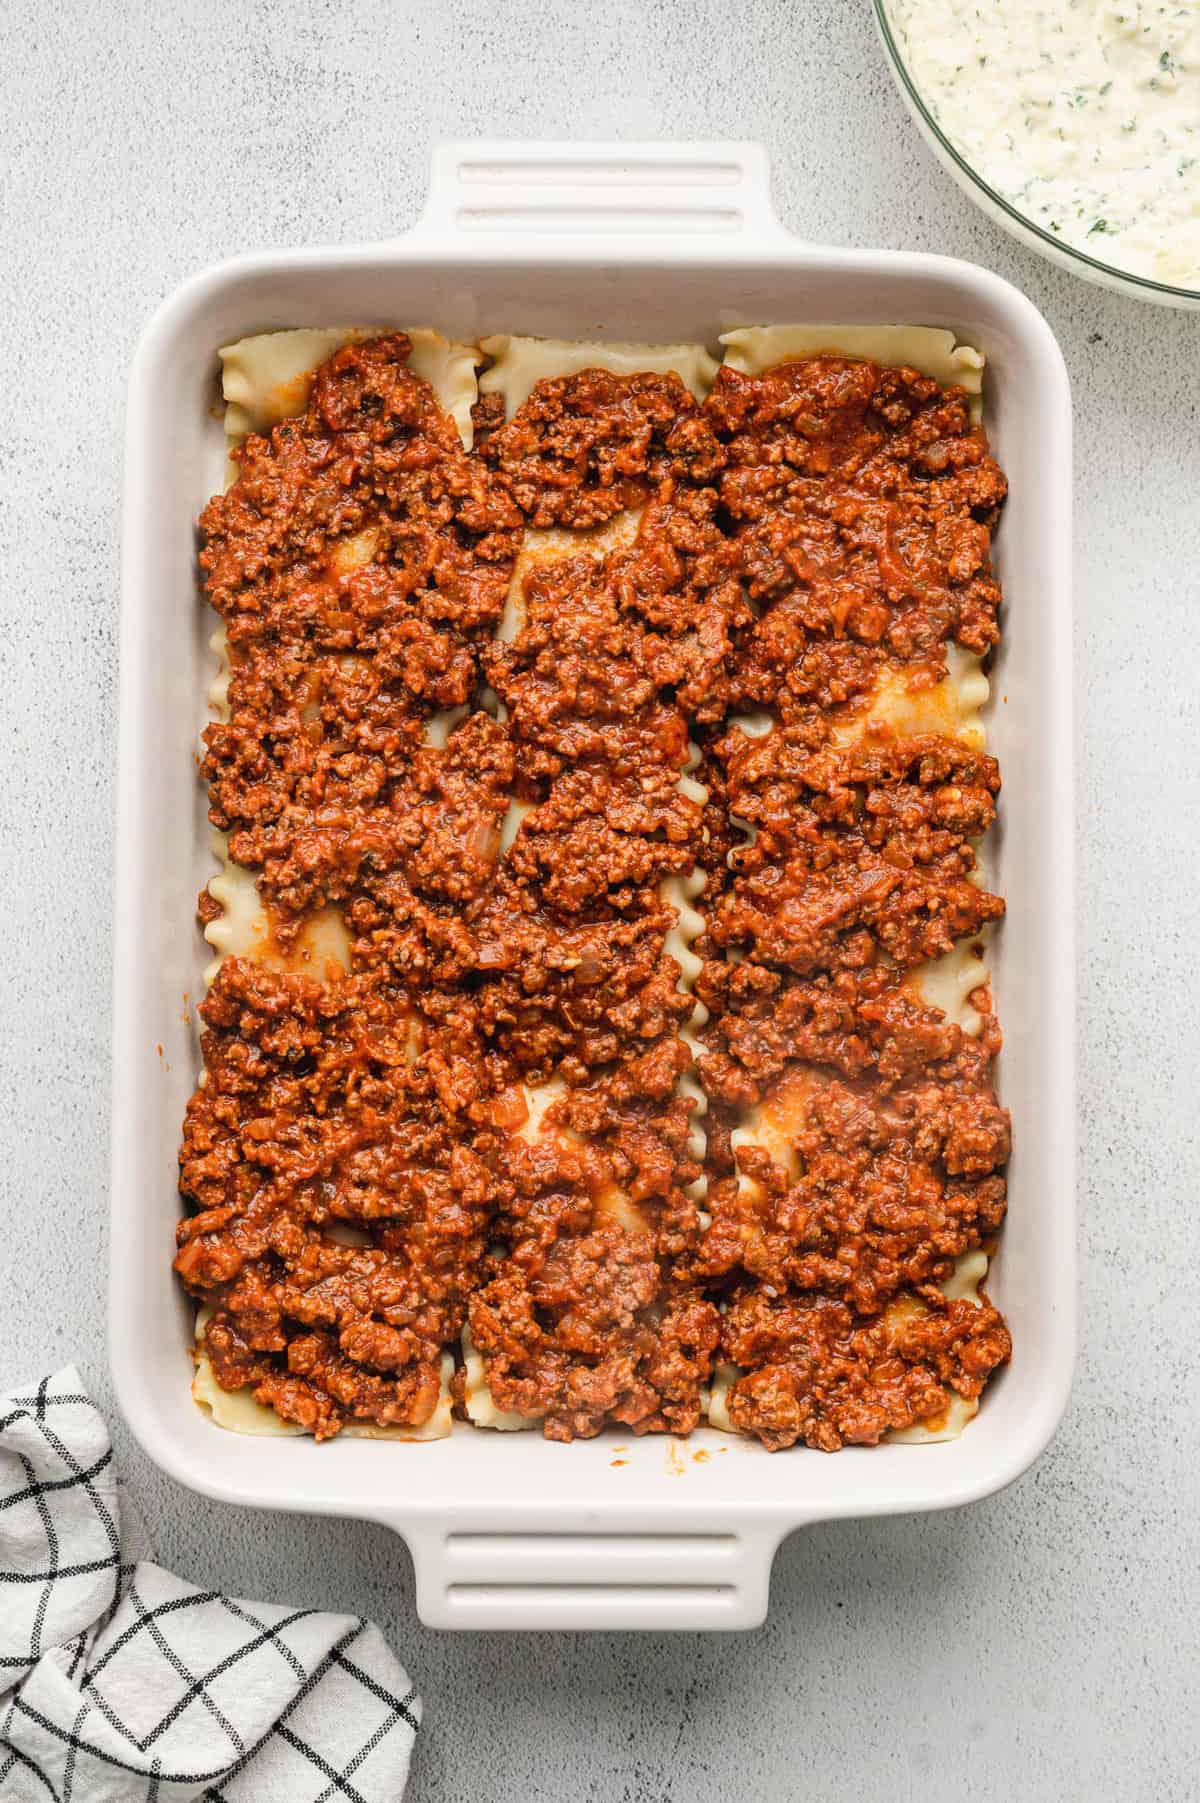 Continuing layering with more ground beef for Homemade Lasagna recipe